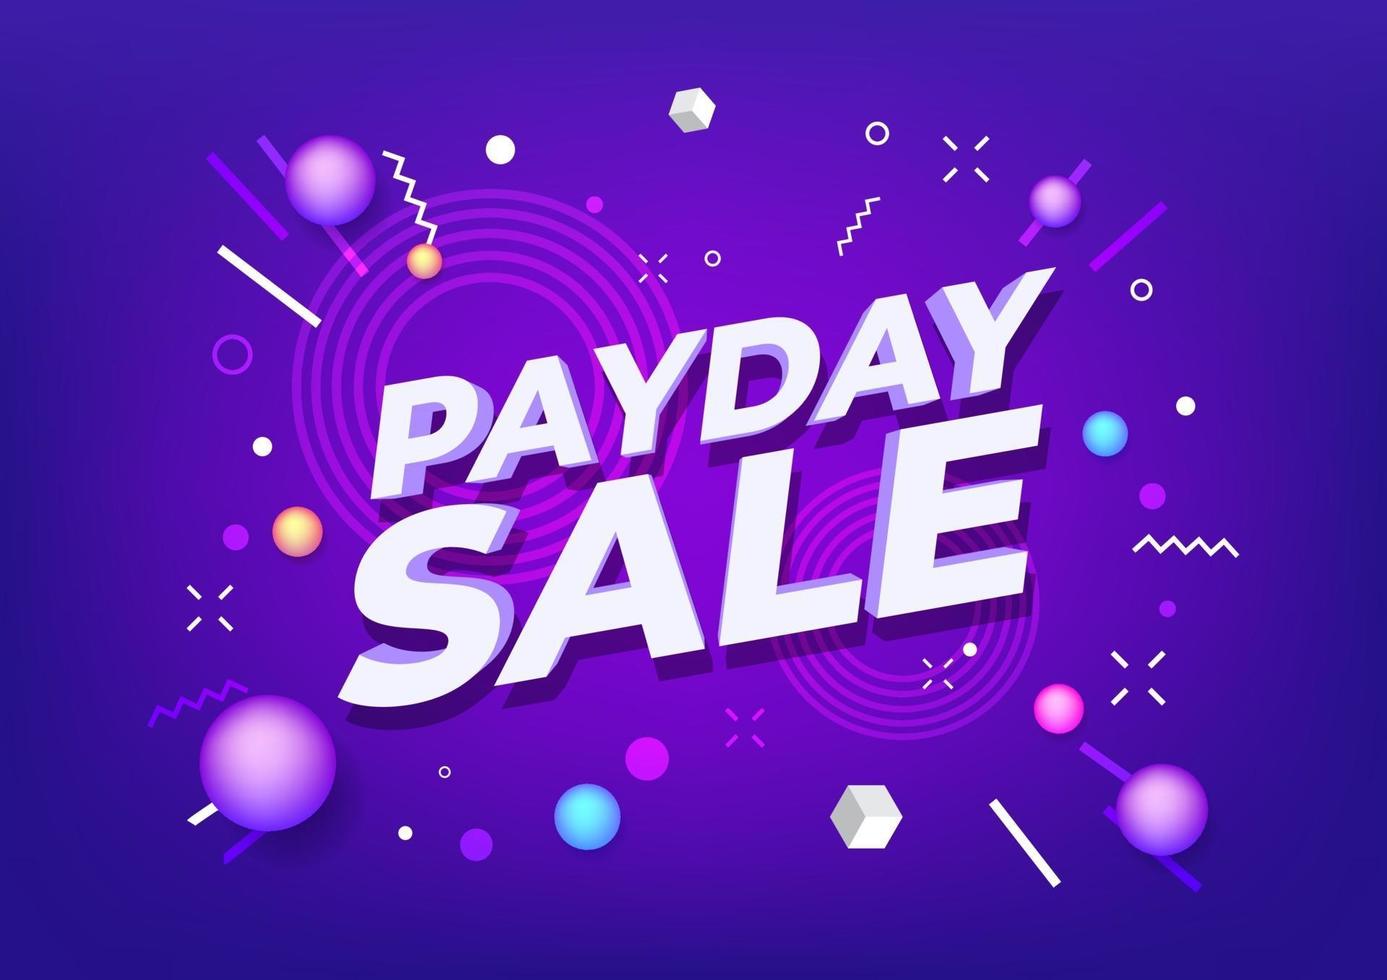 Payday sale special offers banner. vector